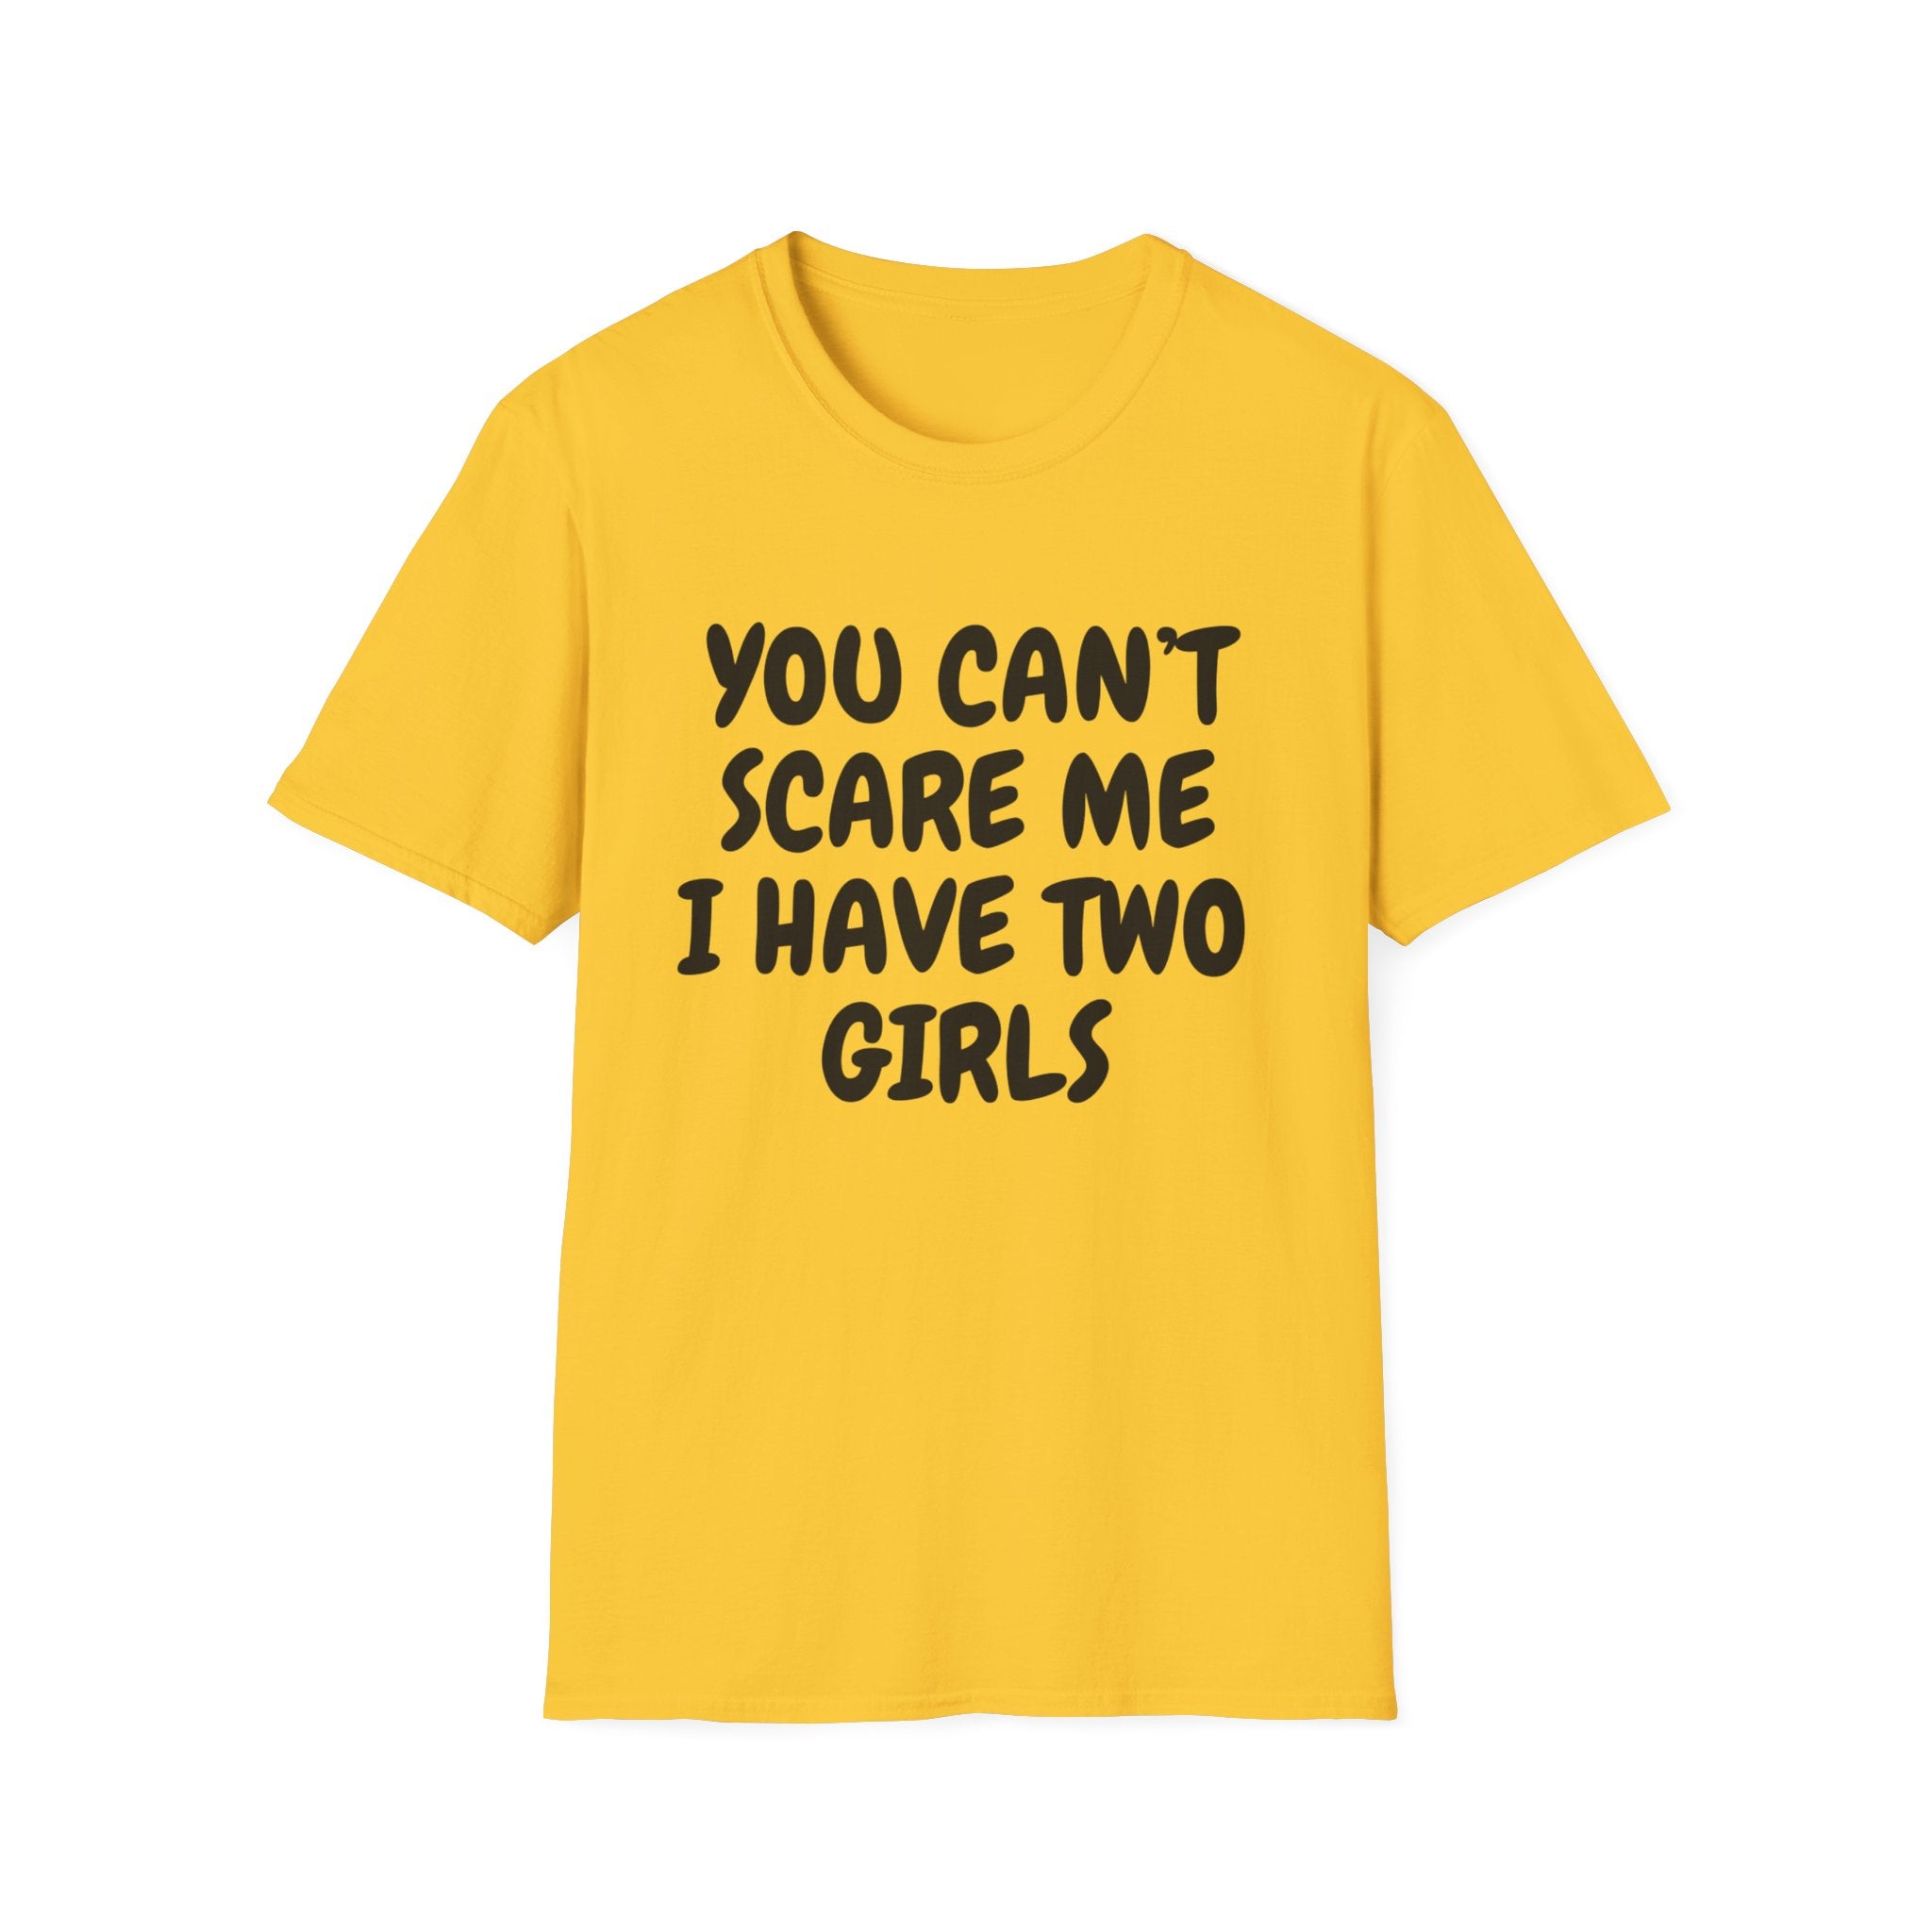 Funny Father's Day Gift for Dad, You Can't Scare Me I have Two Girls, Dad T-shirt, Gift for Grandpa, Gift for Dad, Dad Shirt, Men's T-shirt, Grandpa T-shirt